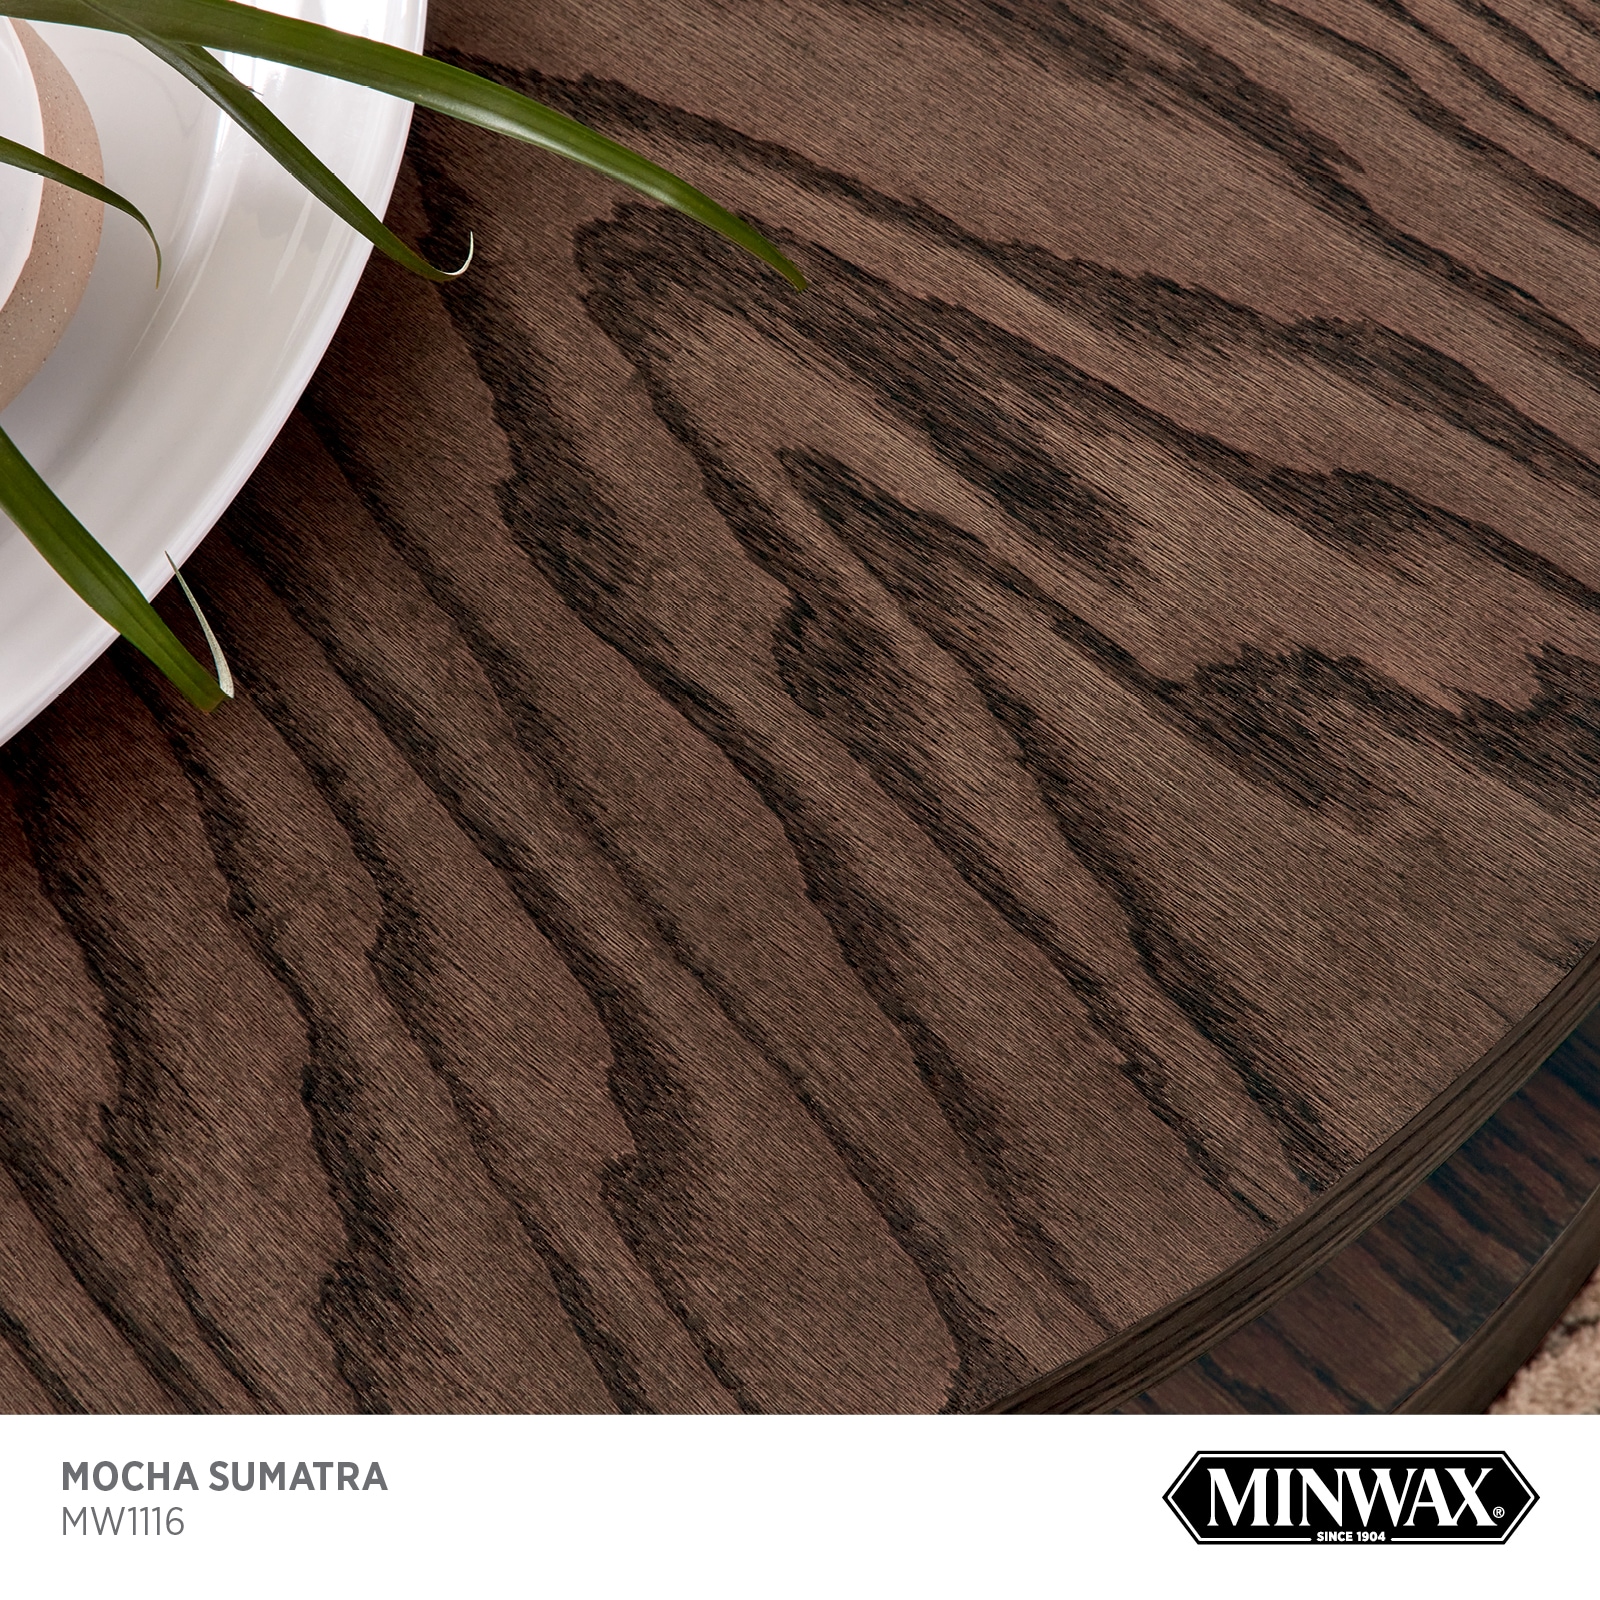 Stain the Minwax (1-Quart) in Mw1116 Wood Sumatra Water-Based Mocha Finish Semi-Transparent at department Stains Interior Interior